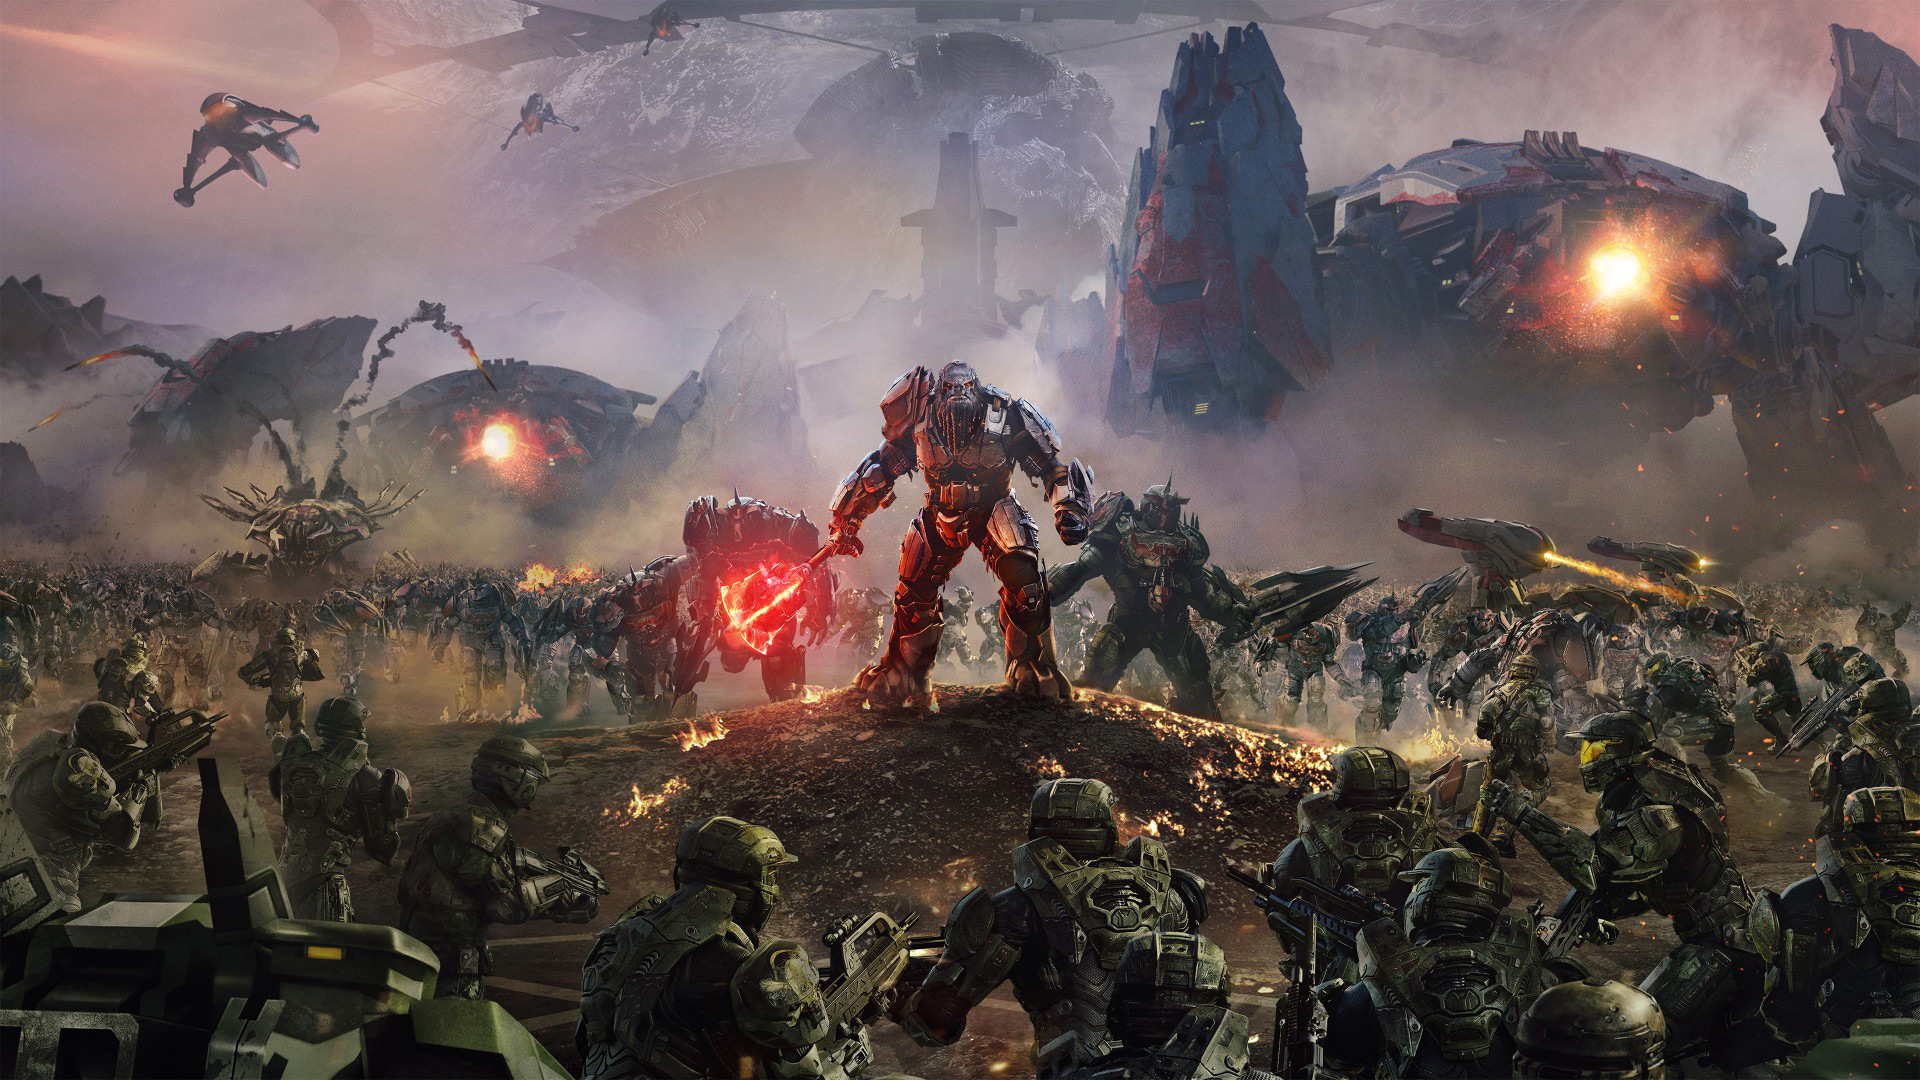 Halo games in order: Halo Wars 2 art showing the Banished warmaster Axiom on a hill surrounded by Spartans.